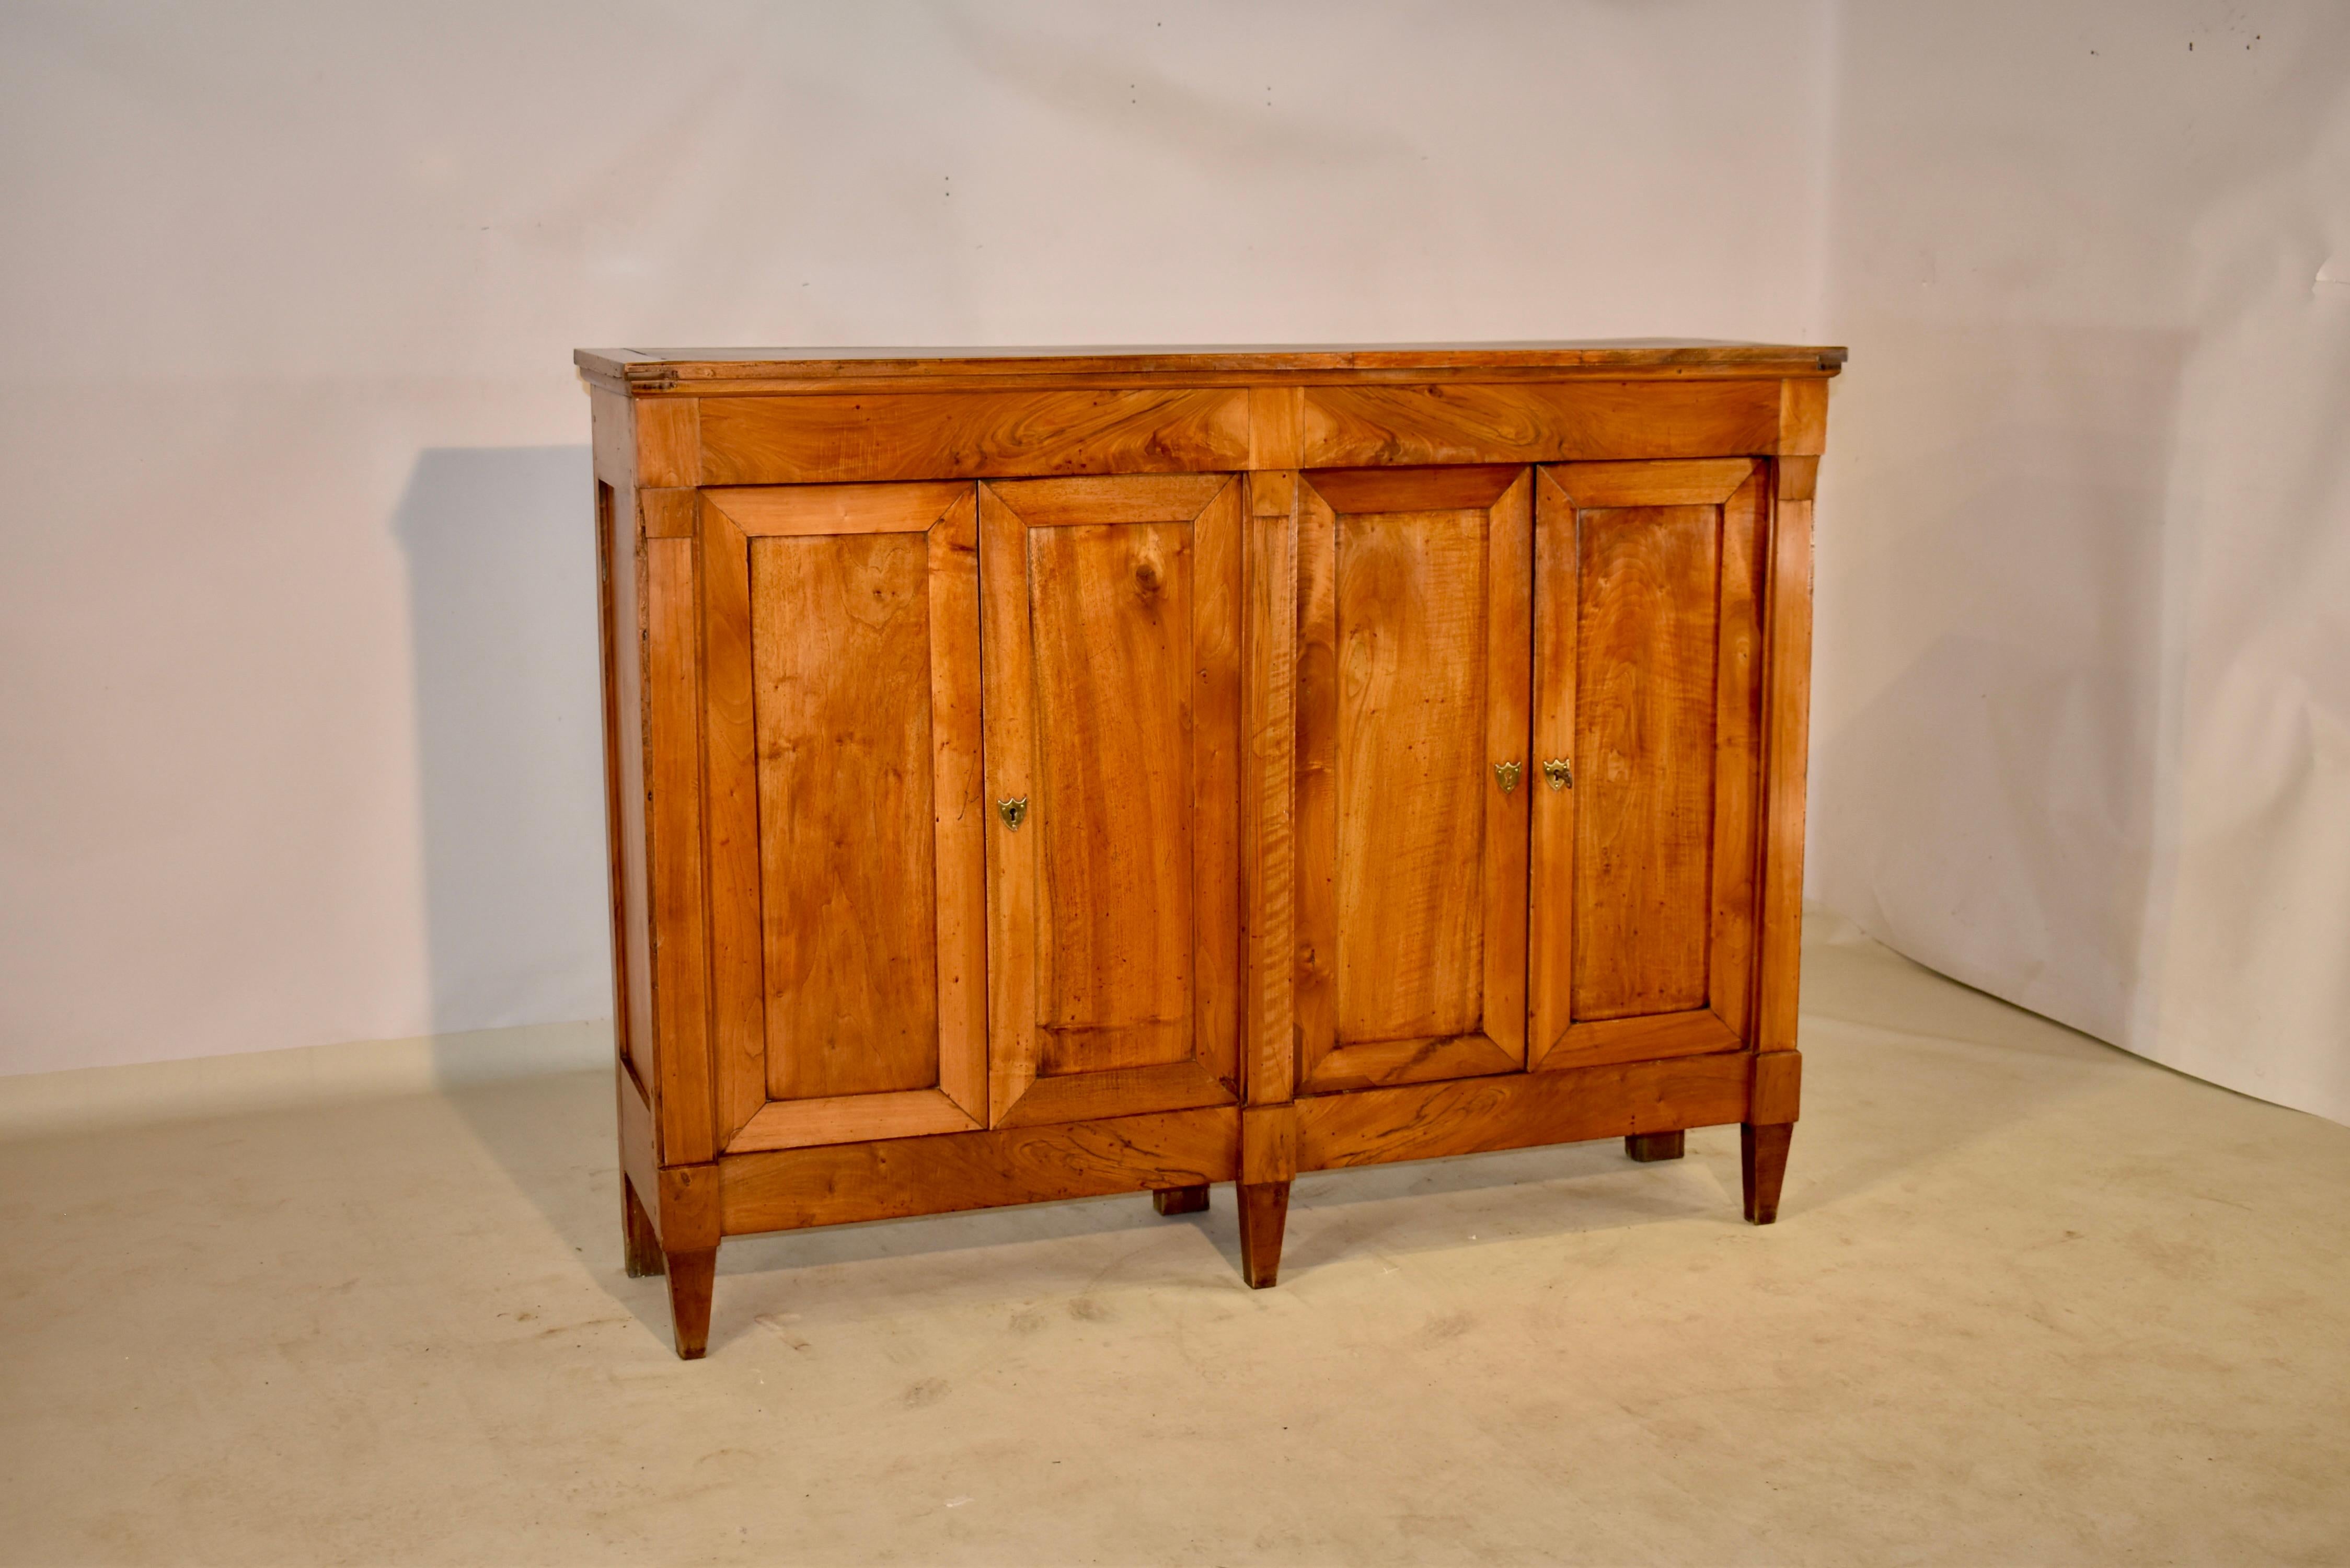 Late 18th century French buffet from the Director period. The piece is made from walnut and cherry and was lovely figuring to the wood. the top is banded and follows down to paneled sides and two pairs of doors in the front which open to reveal